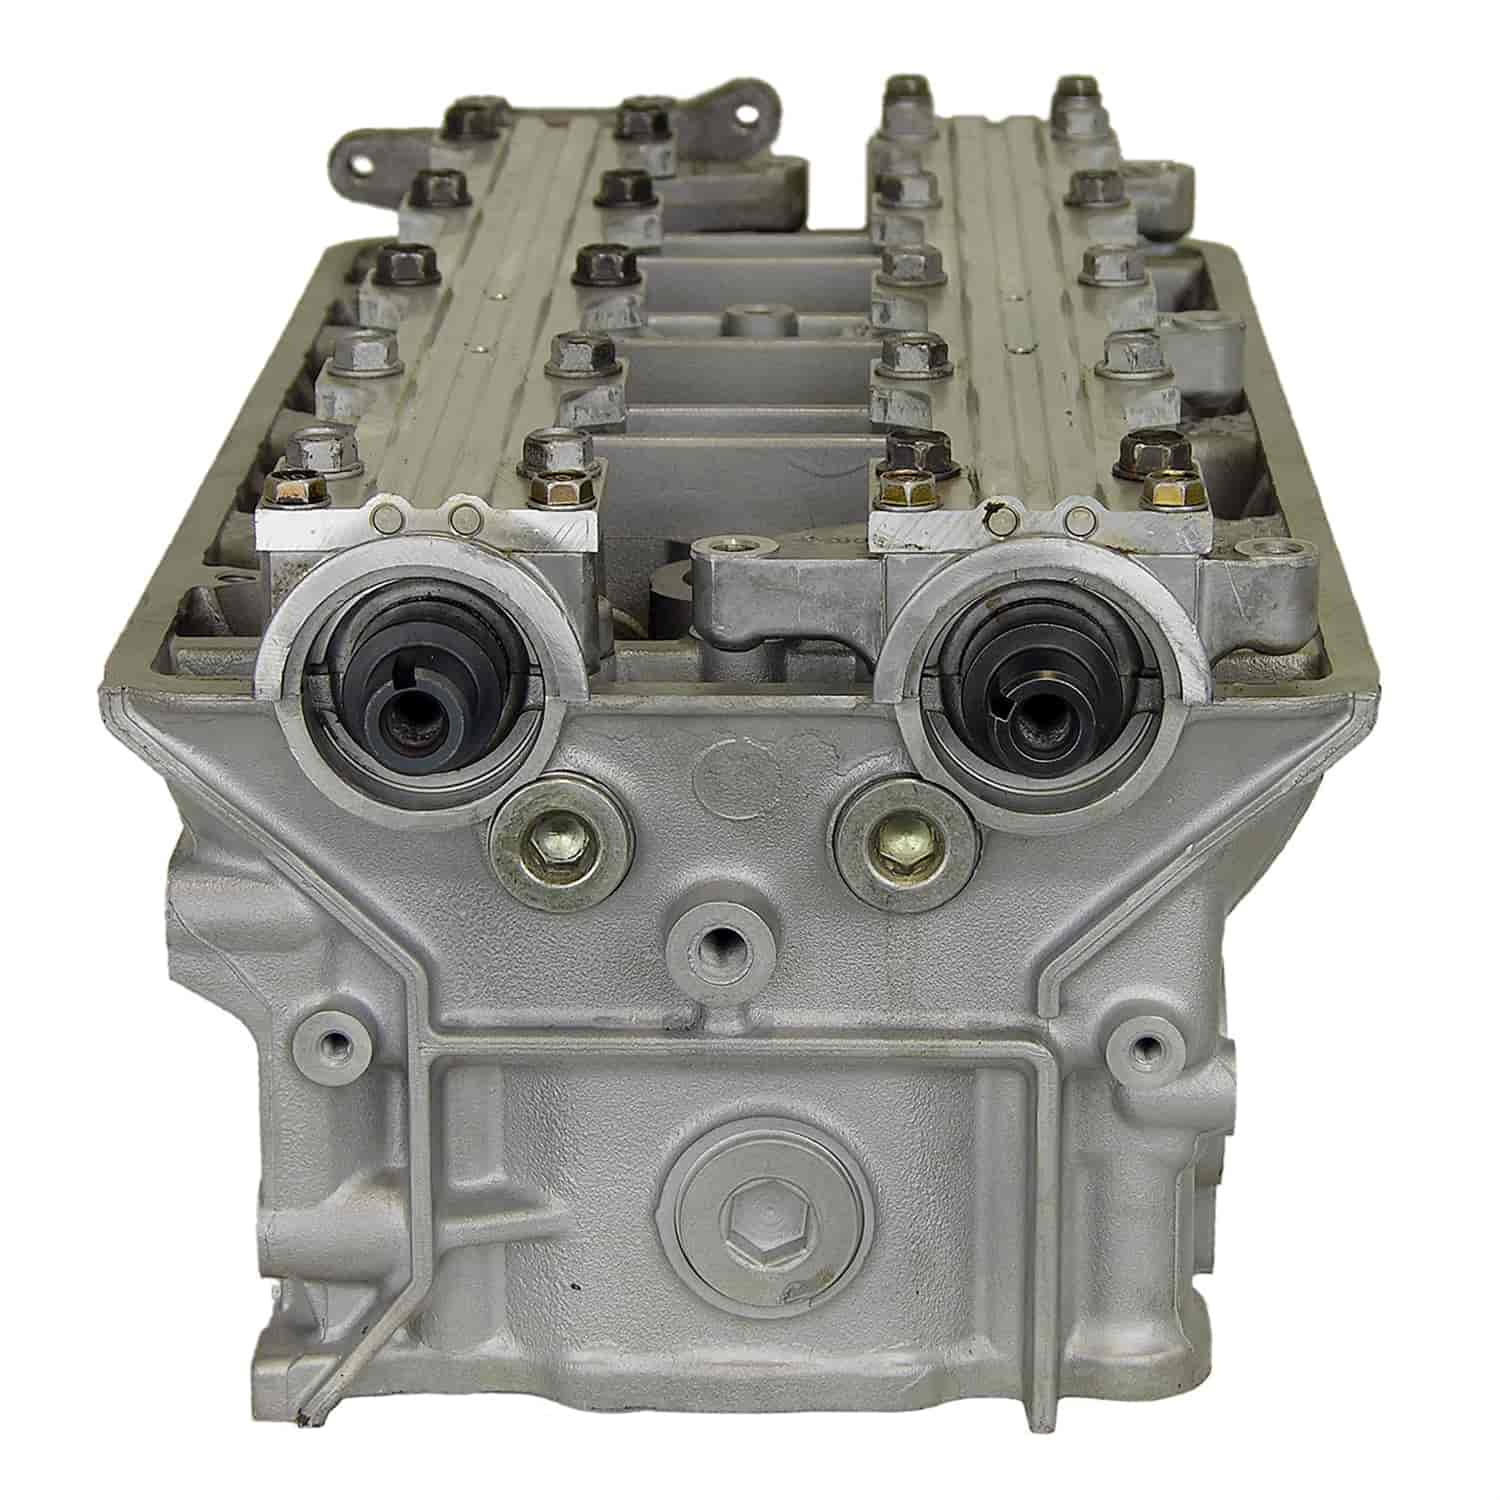 Remanufactured Cylinder Head for 1993-1997 Honda Prelude with